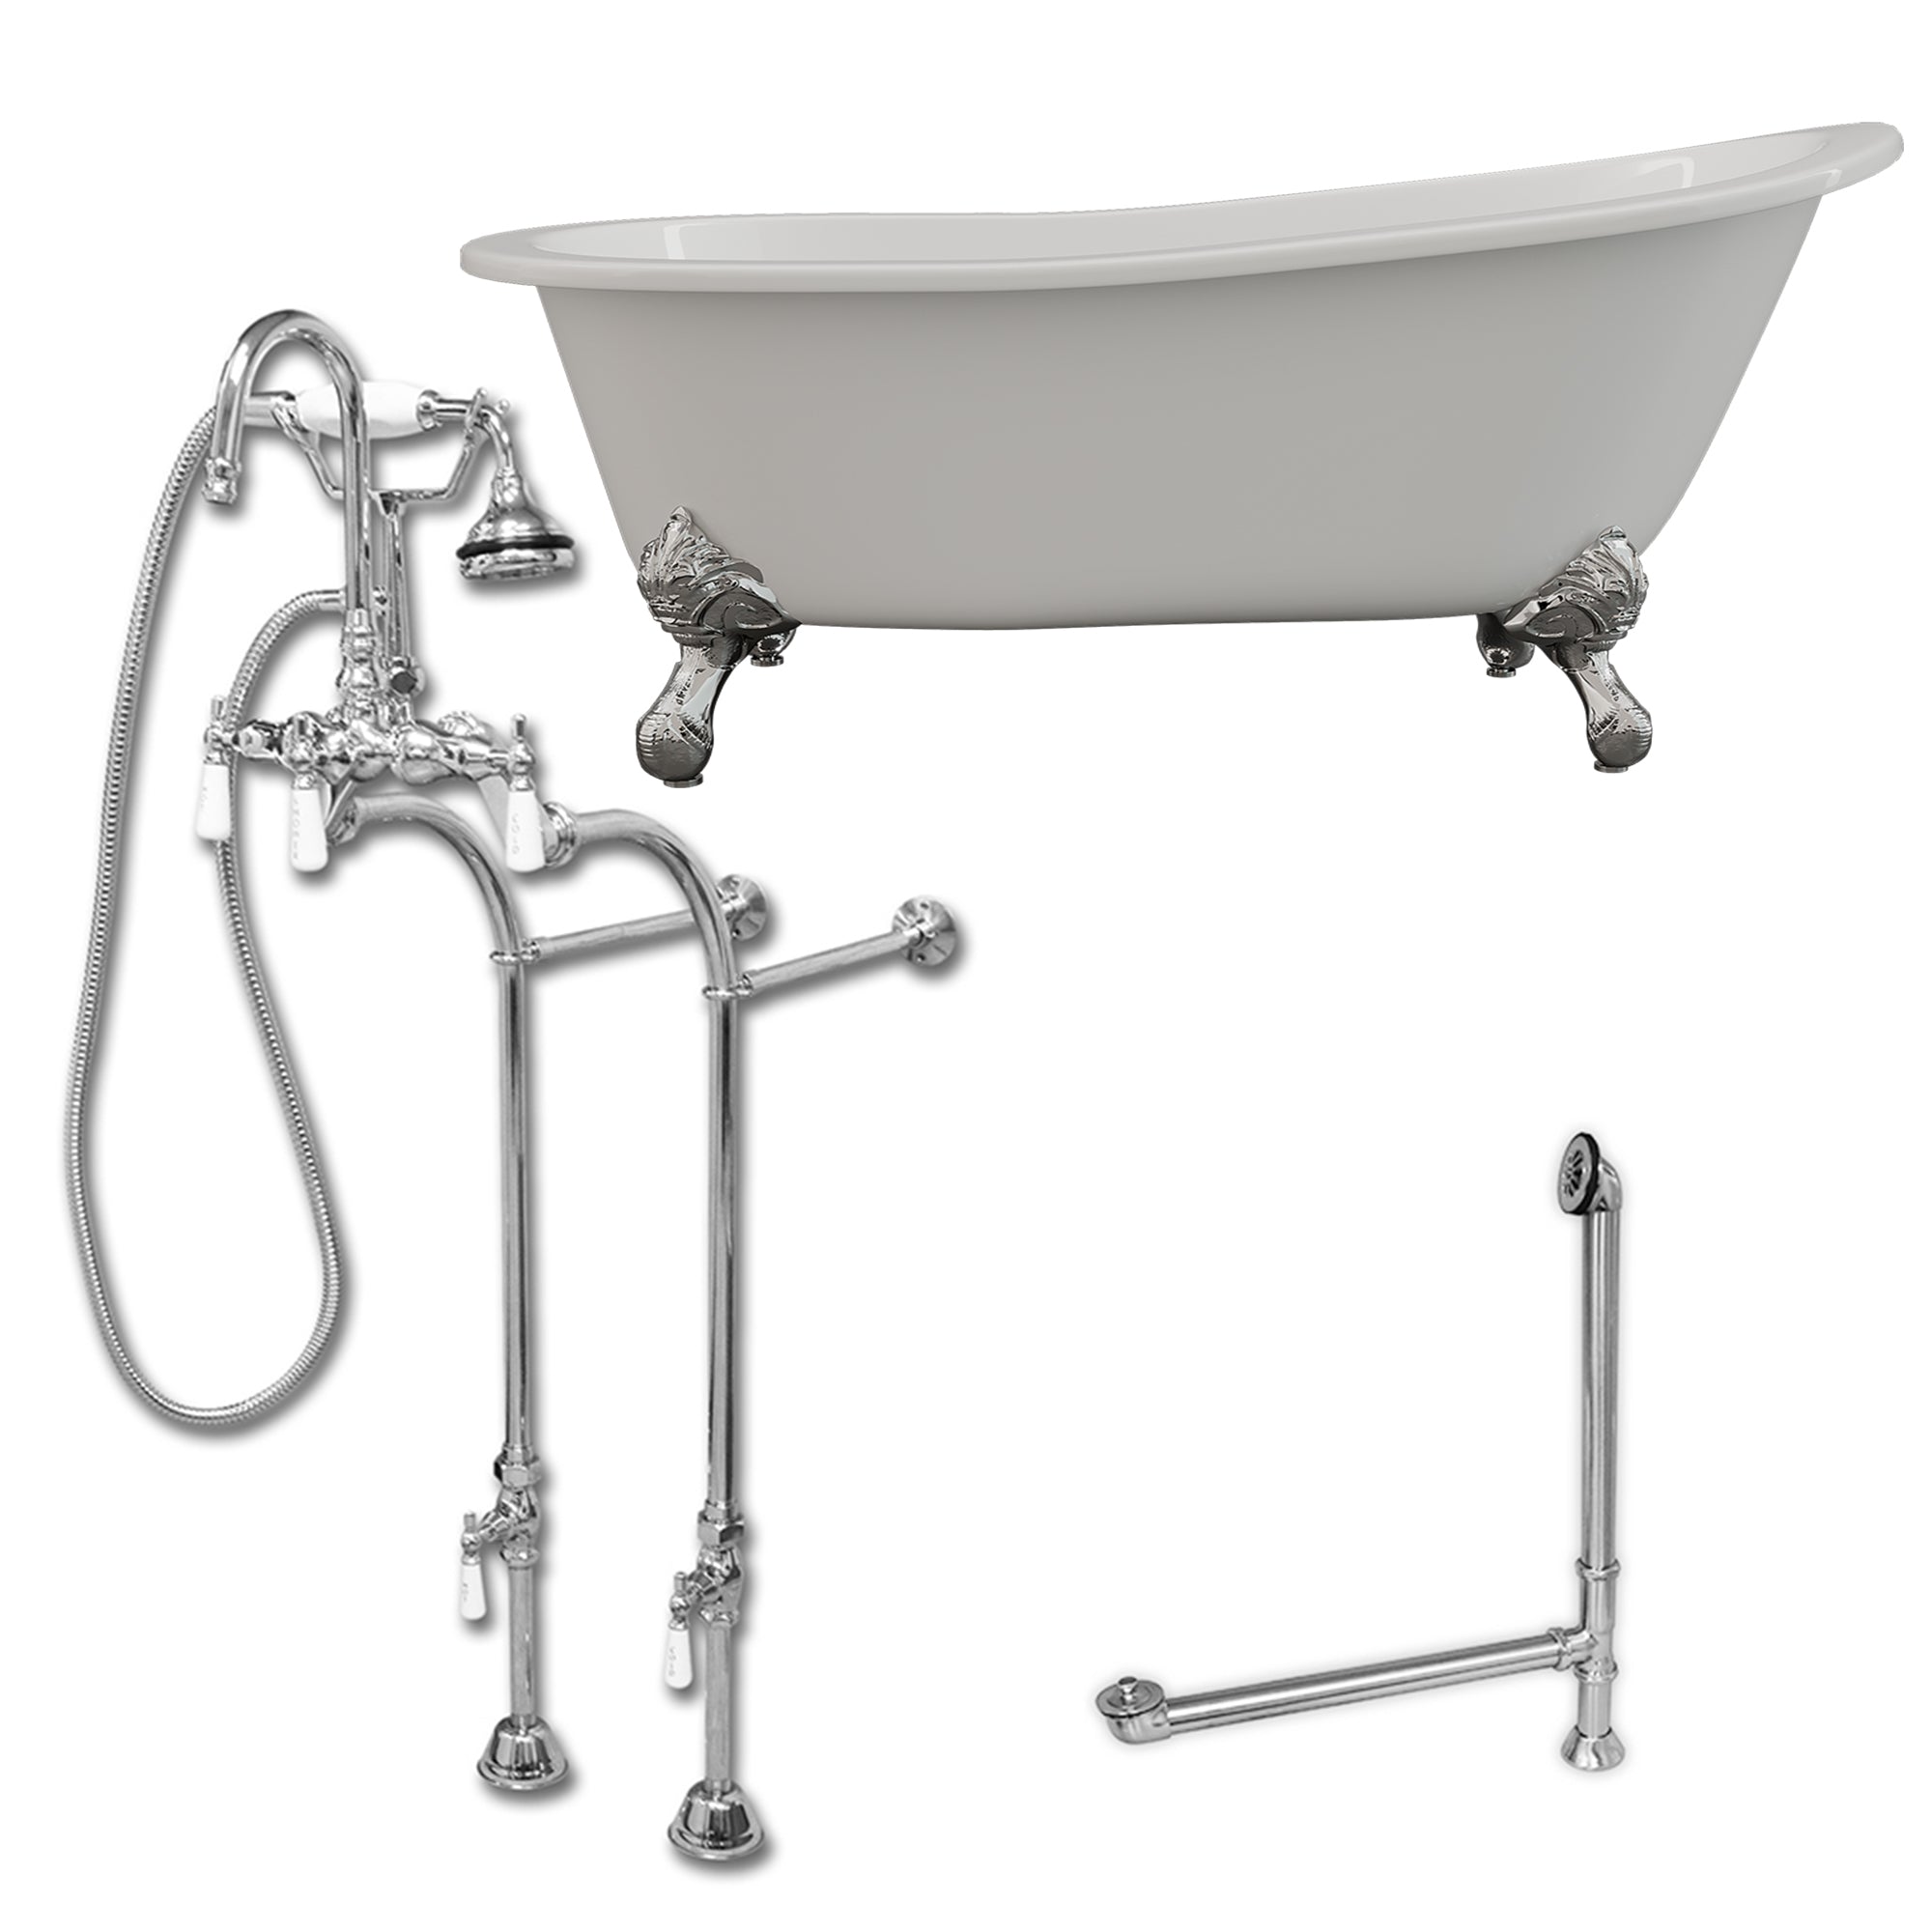 Cambridge Plumbing 67-Inch Slipper Cast Iron Clawfoot Tub (Porcelain enamel interior, white paint exterior) and Freestanding Plumbing Package (Brushed Nickel) ST67-398684-PKG-NH - Vital Hydrotherapy